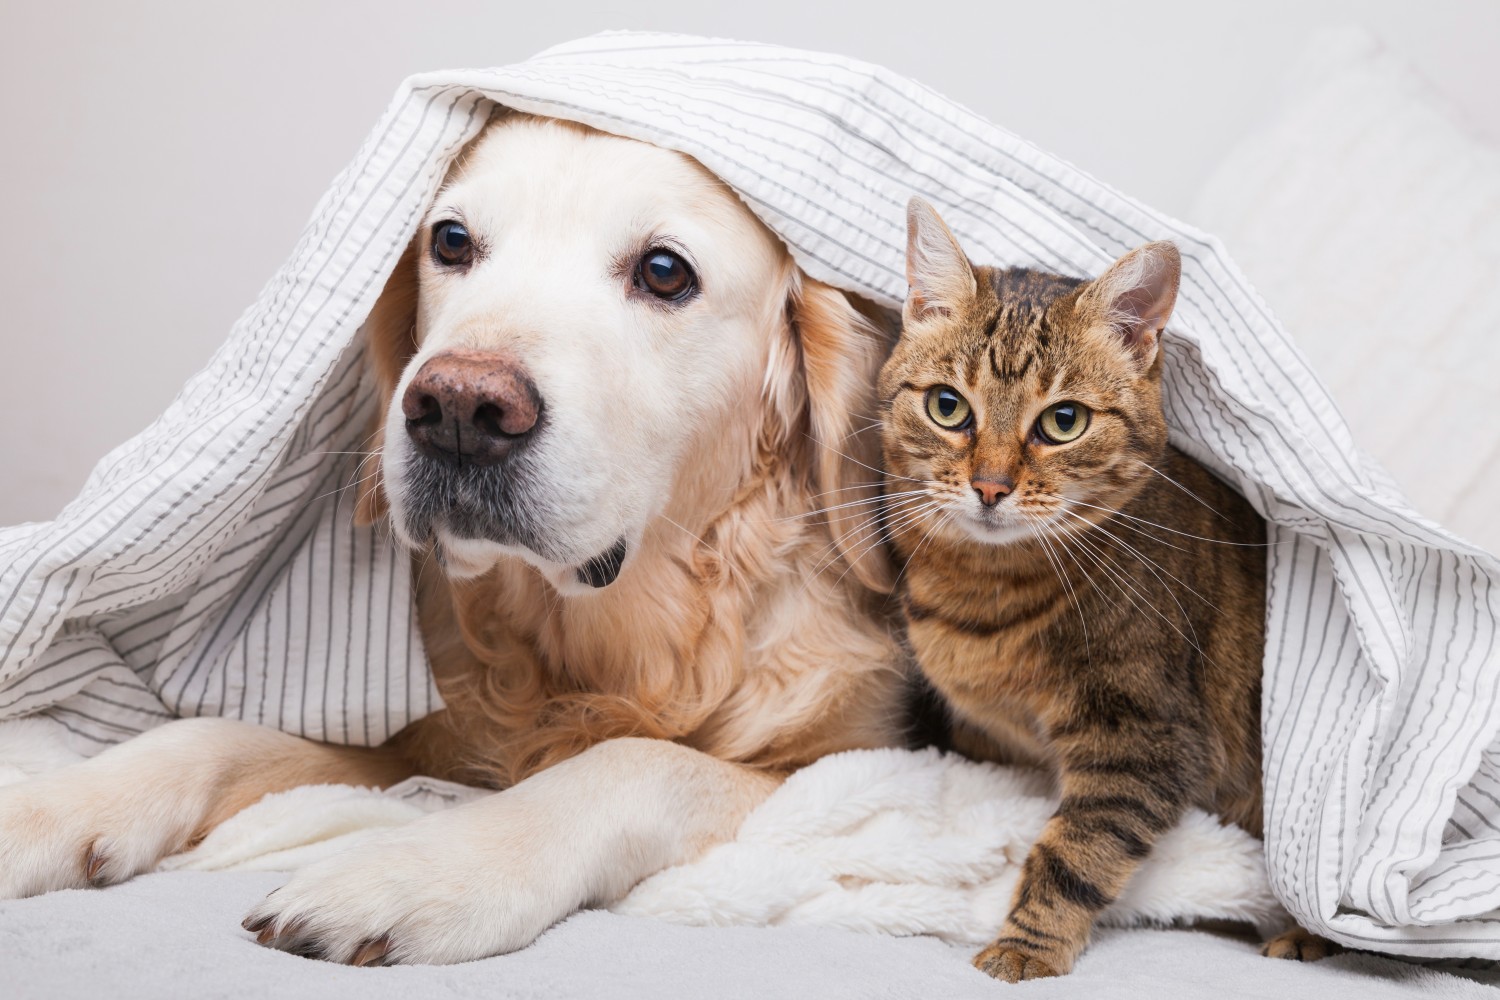 A dog and a cat sitting together under a blanket